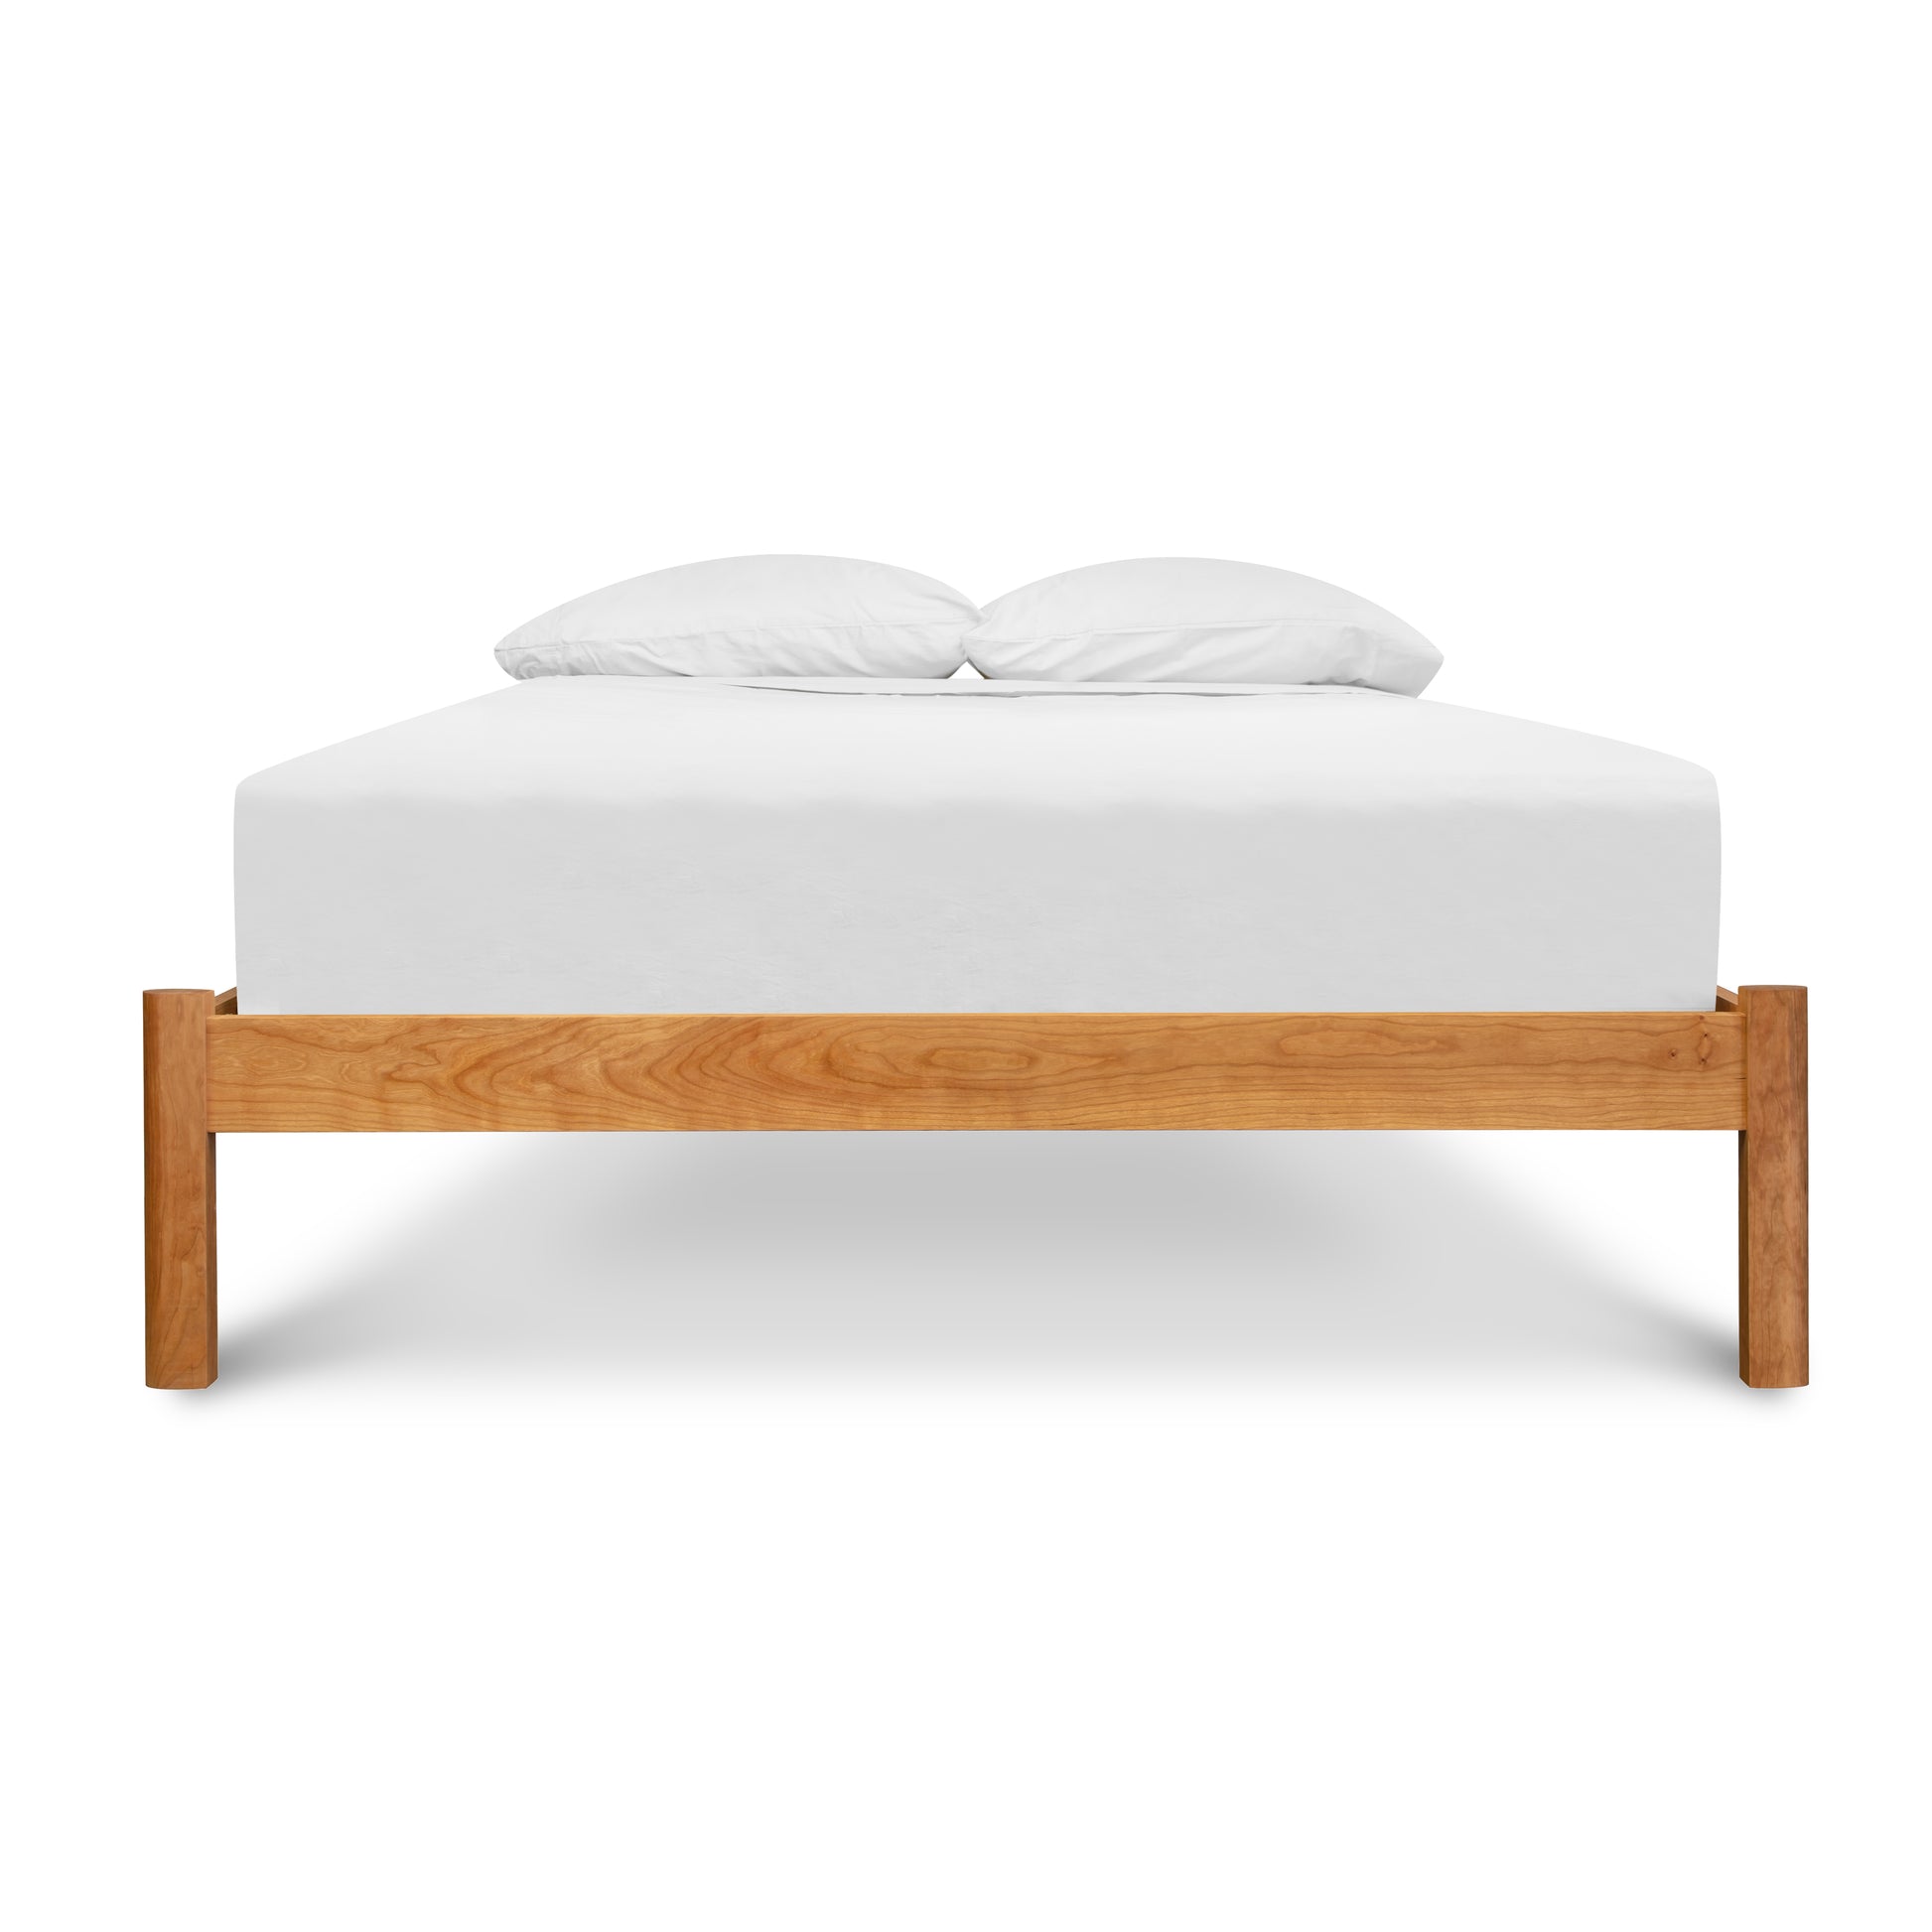 A Heartwood Shaker Studio-Style Platform Bed from Vermont Furniture Designs with a white mattress and two pillows against a white background, complete with an eco-friendly oil finish.